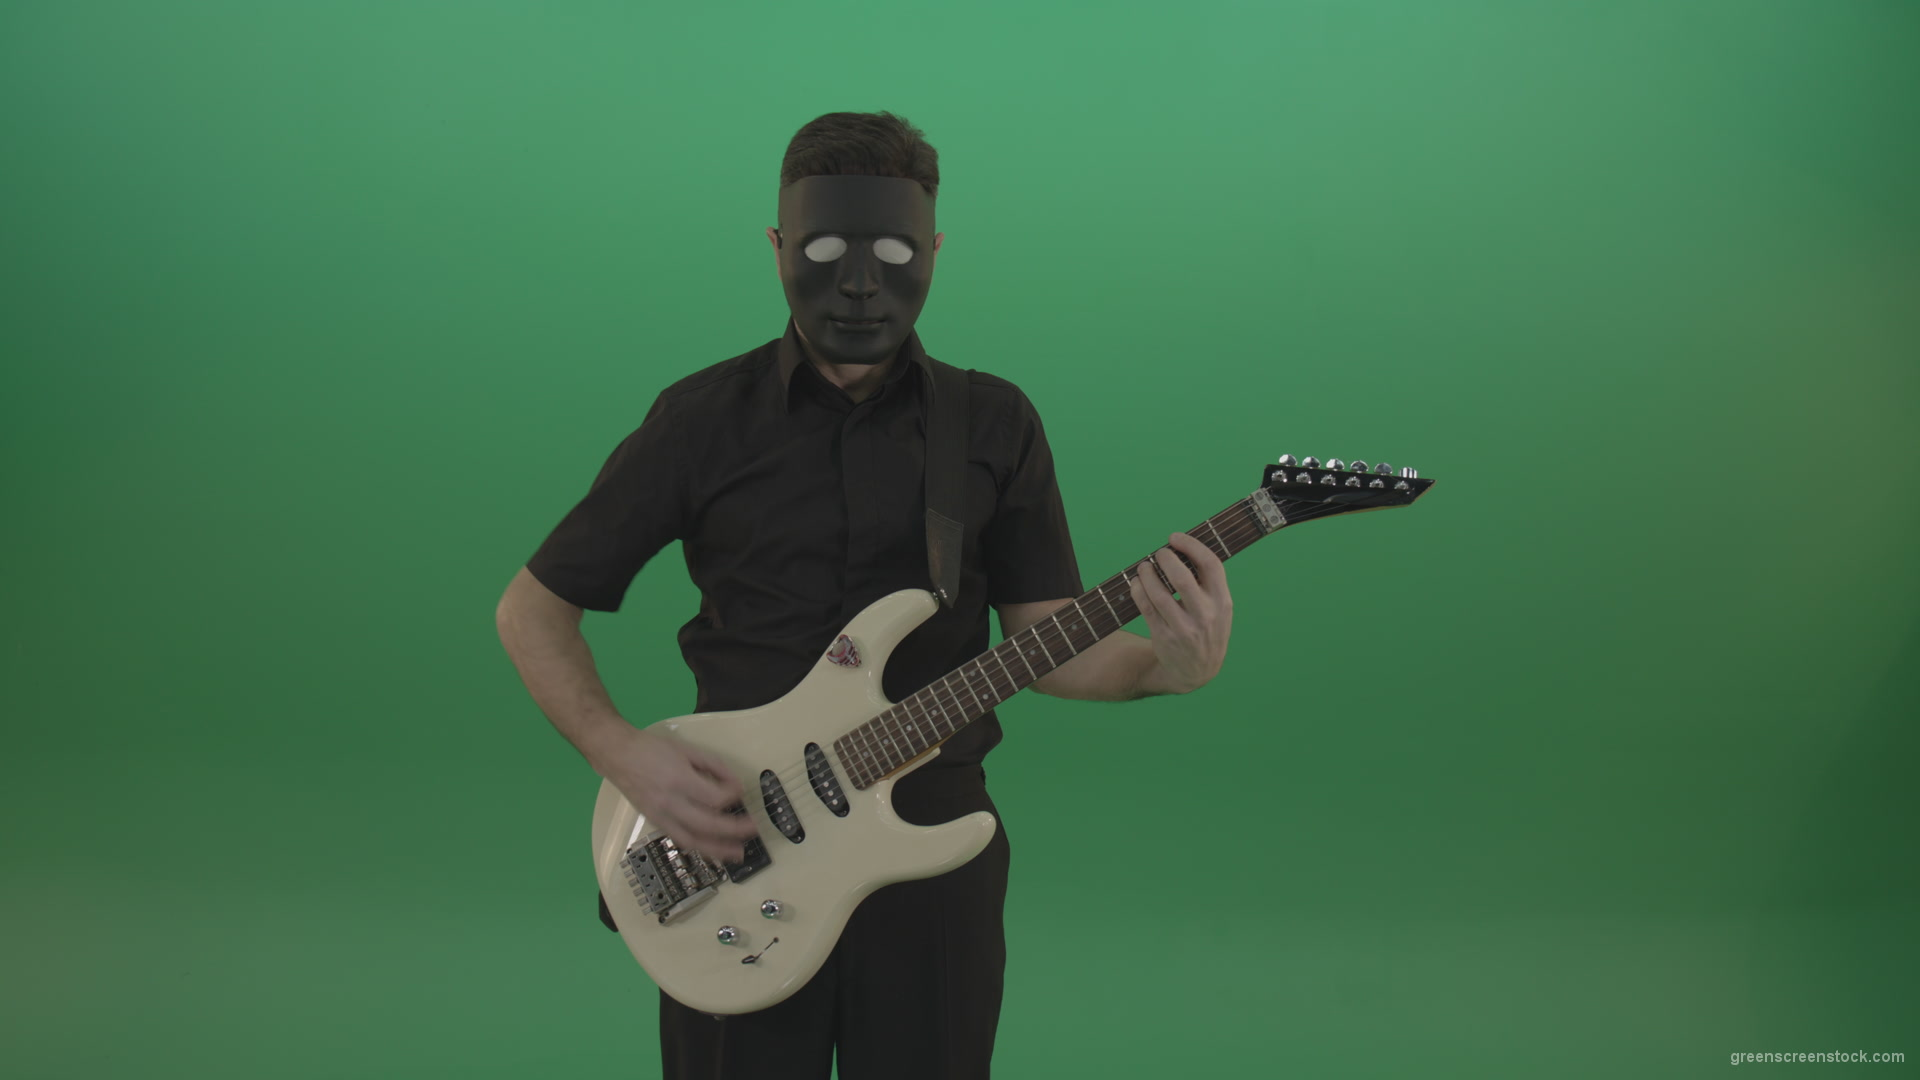 Hard-rock-guitarist-man-playing-white-guitar-in-black-mask-isolated-on-green-background_004 Green Screen Stock